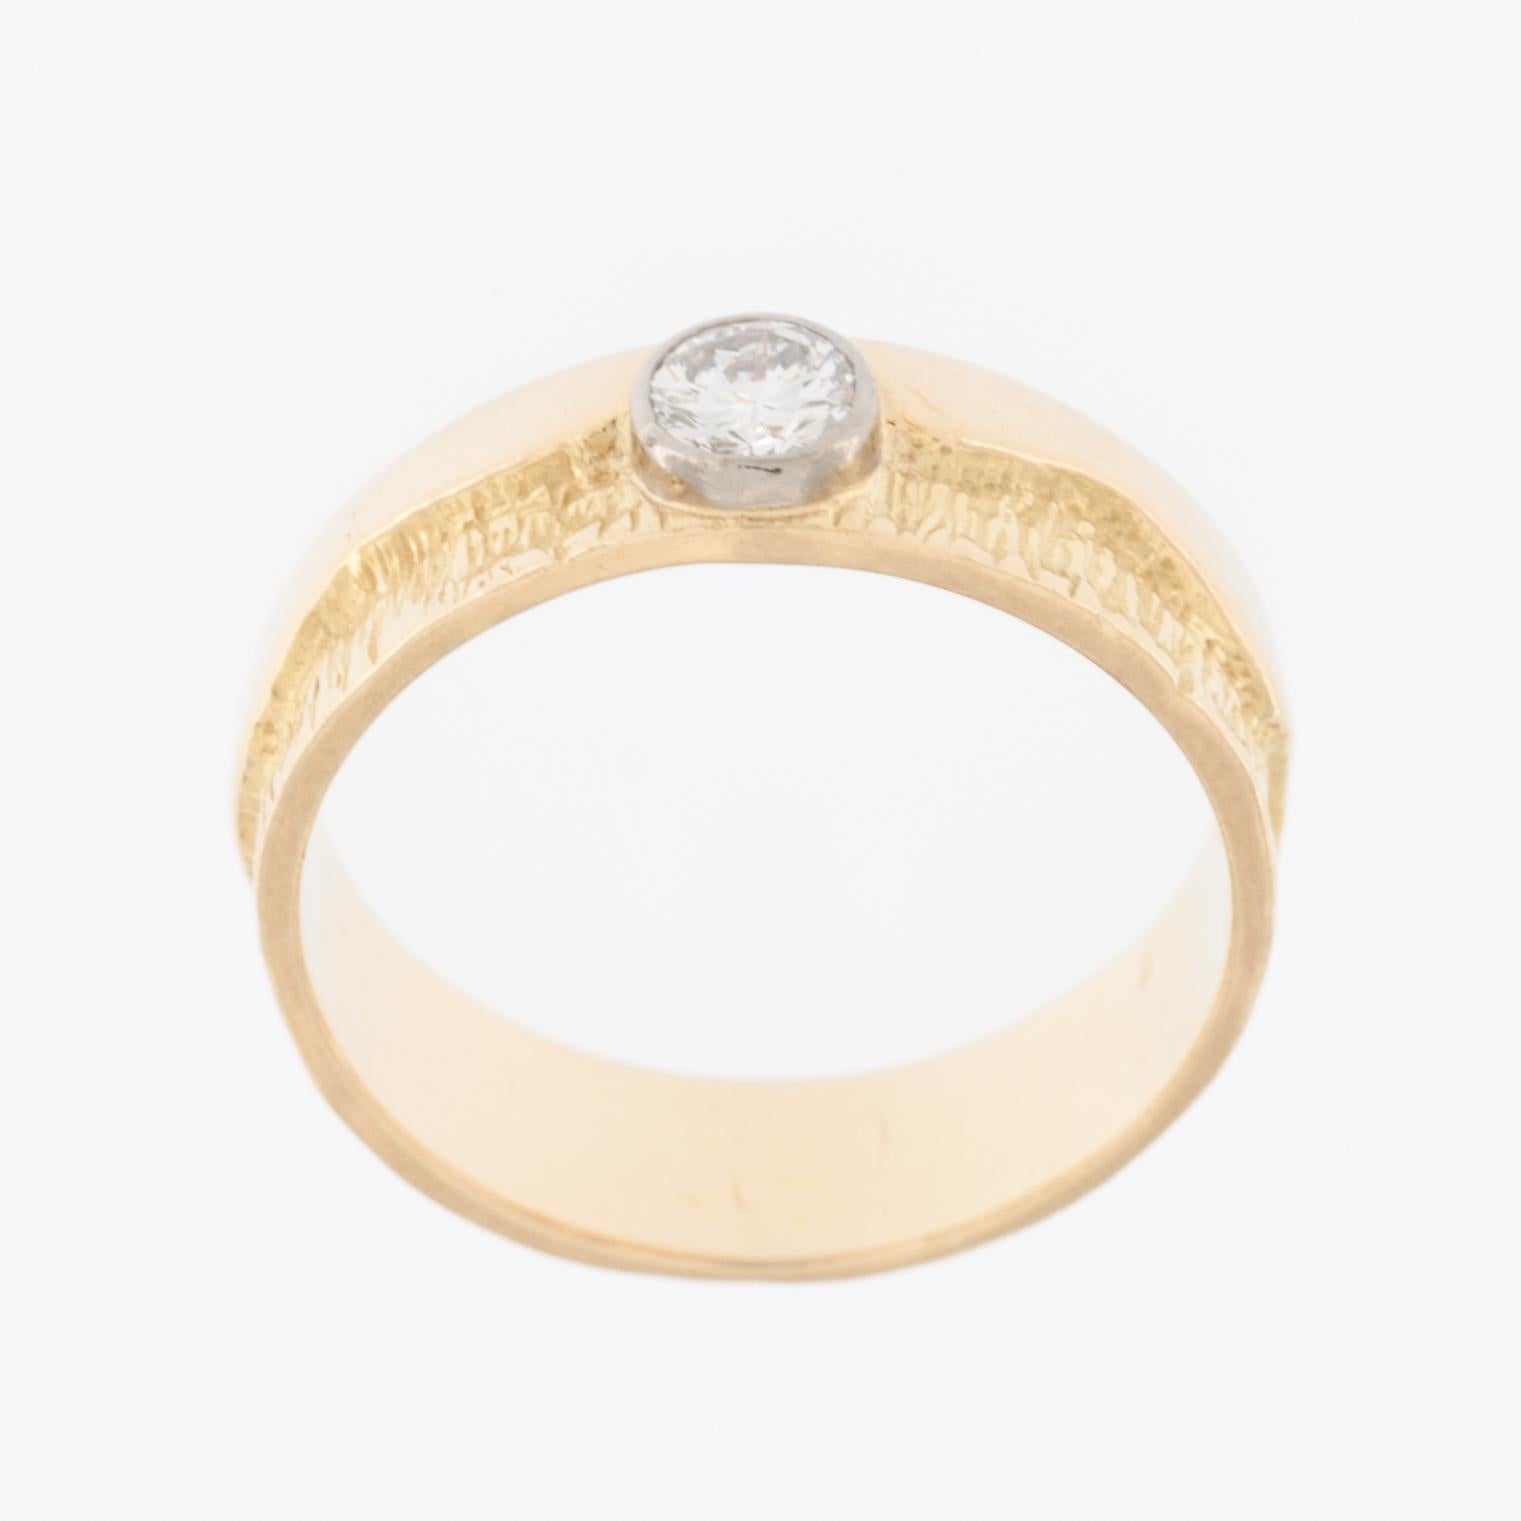 The Vintage Solitaire Diamond 18kt Yellow Gold Ring is a wonderful piece of jewelry with several distinctive features.

This ring features a single, 0.40ct brilliant-cut central diamond as the main focal point. Solitaire diamonds are known for their